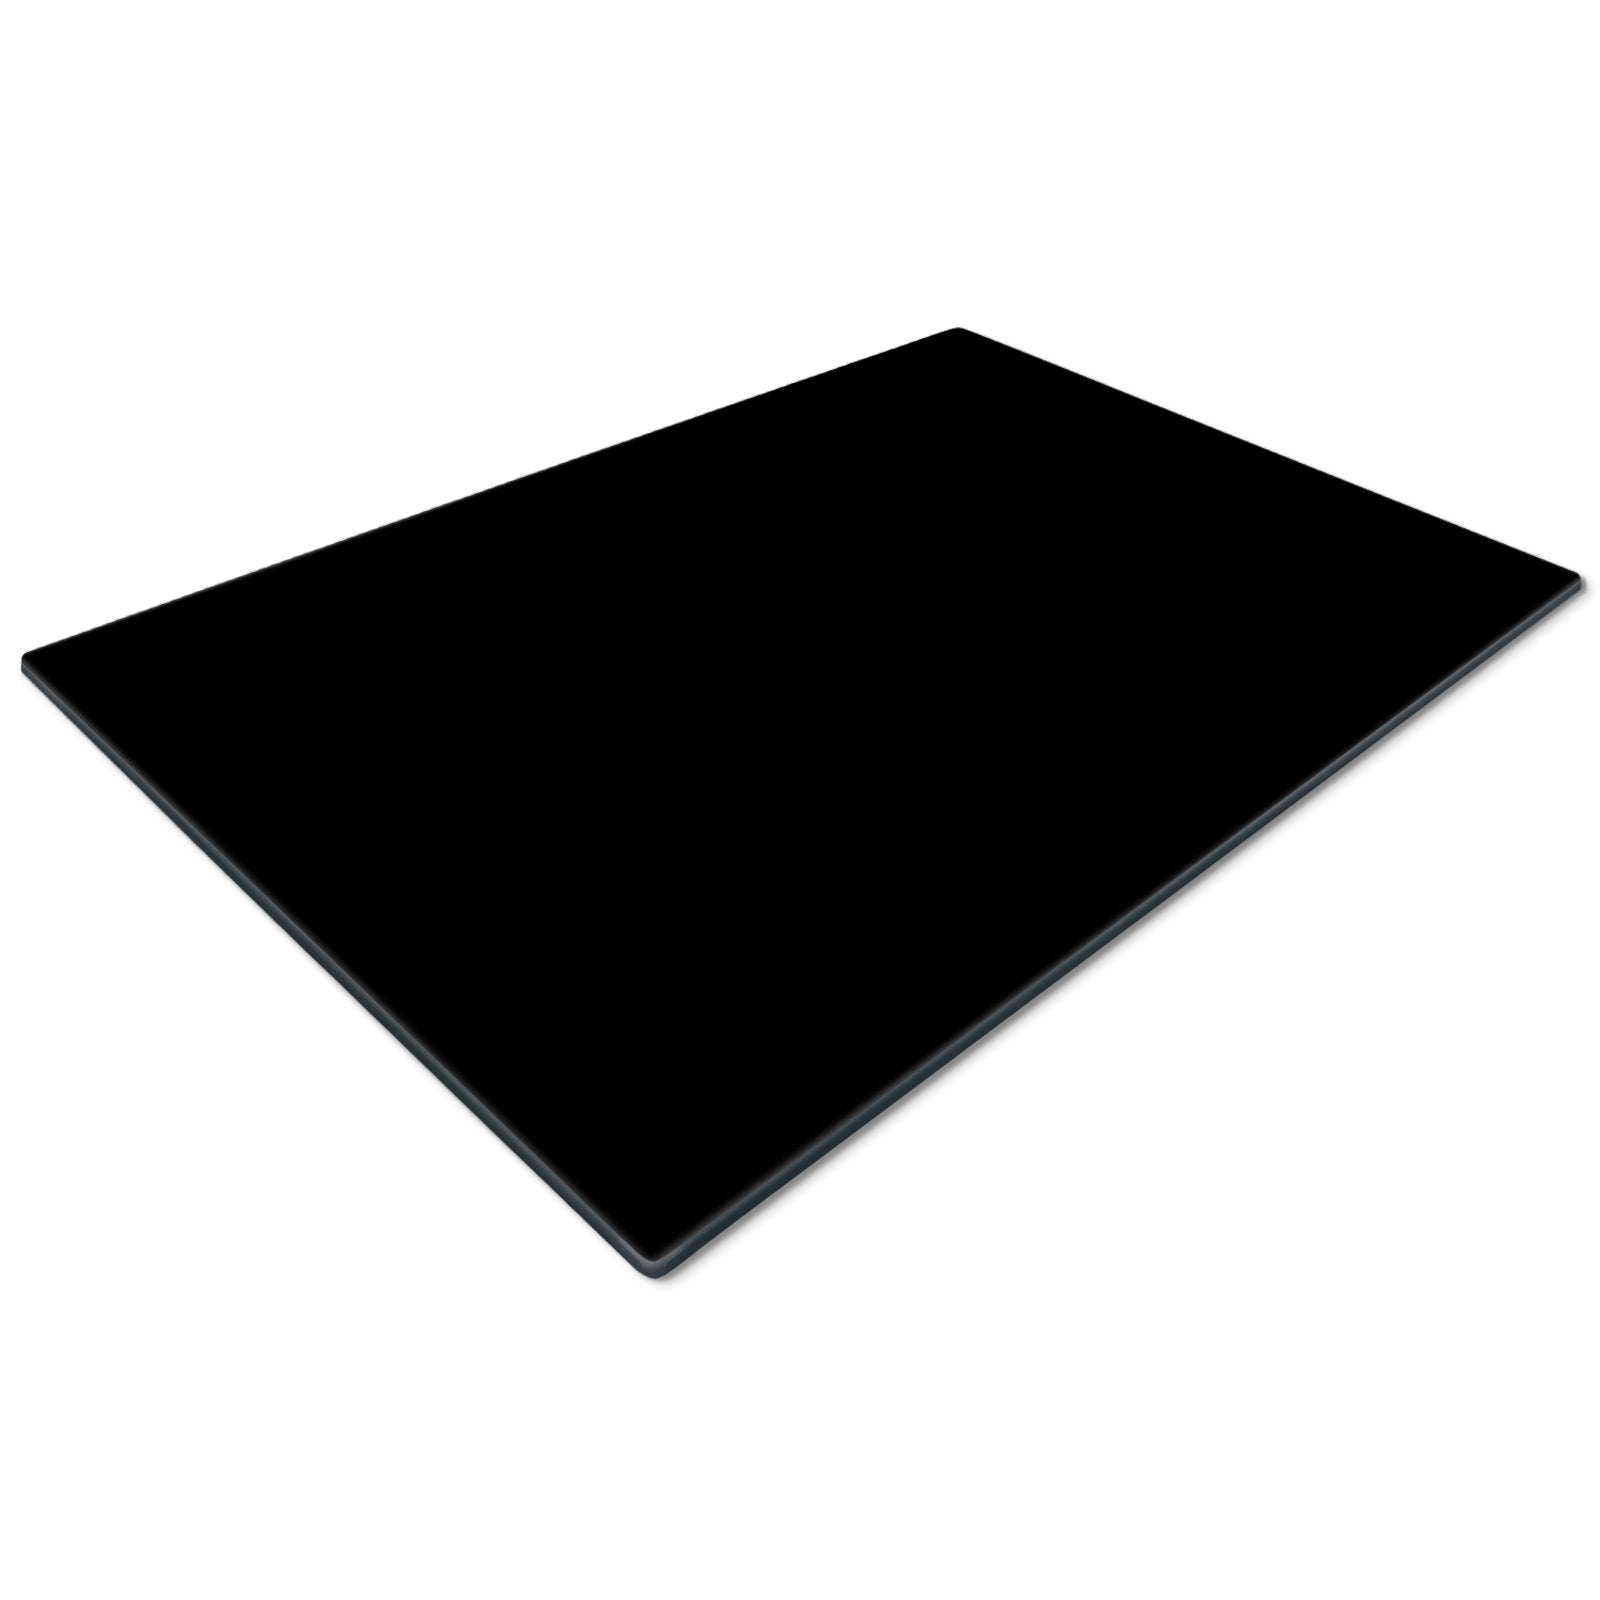 Glass Chopping Board For Kitchen in Black Surface Protector